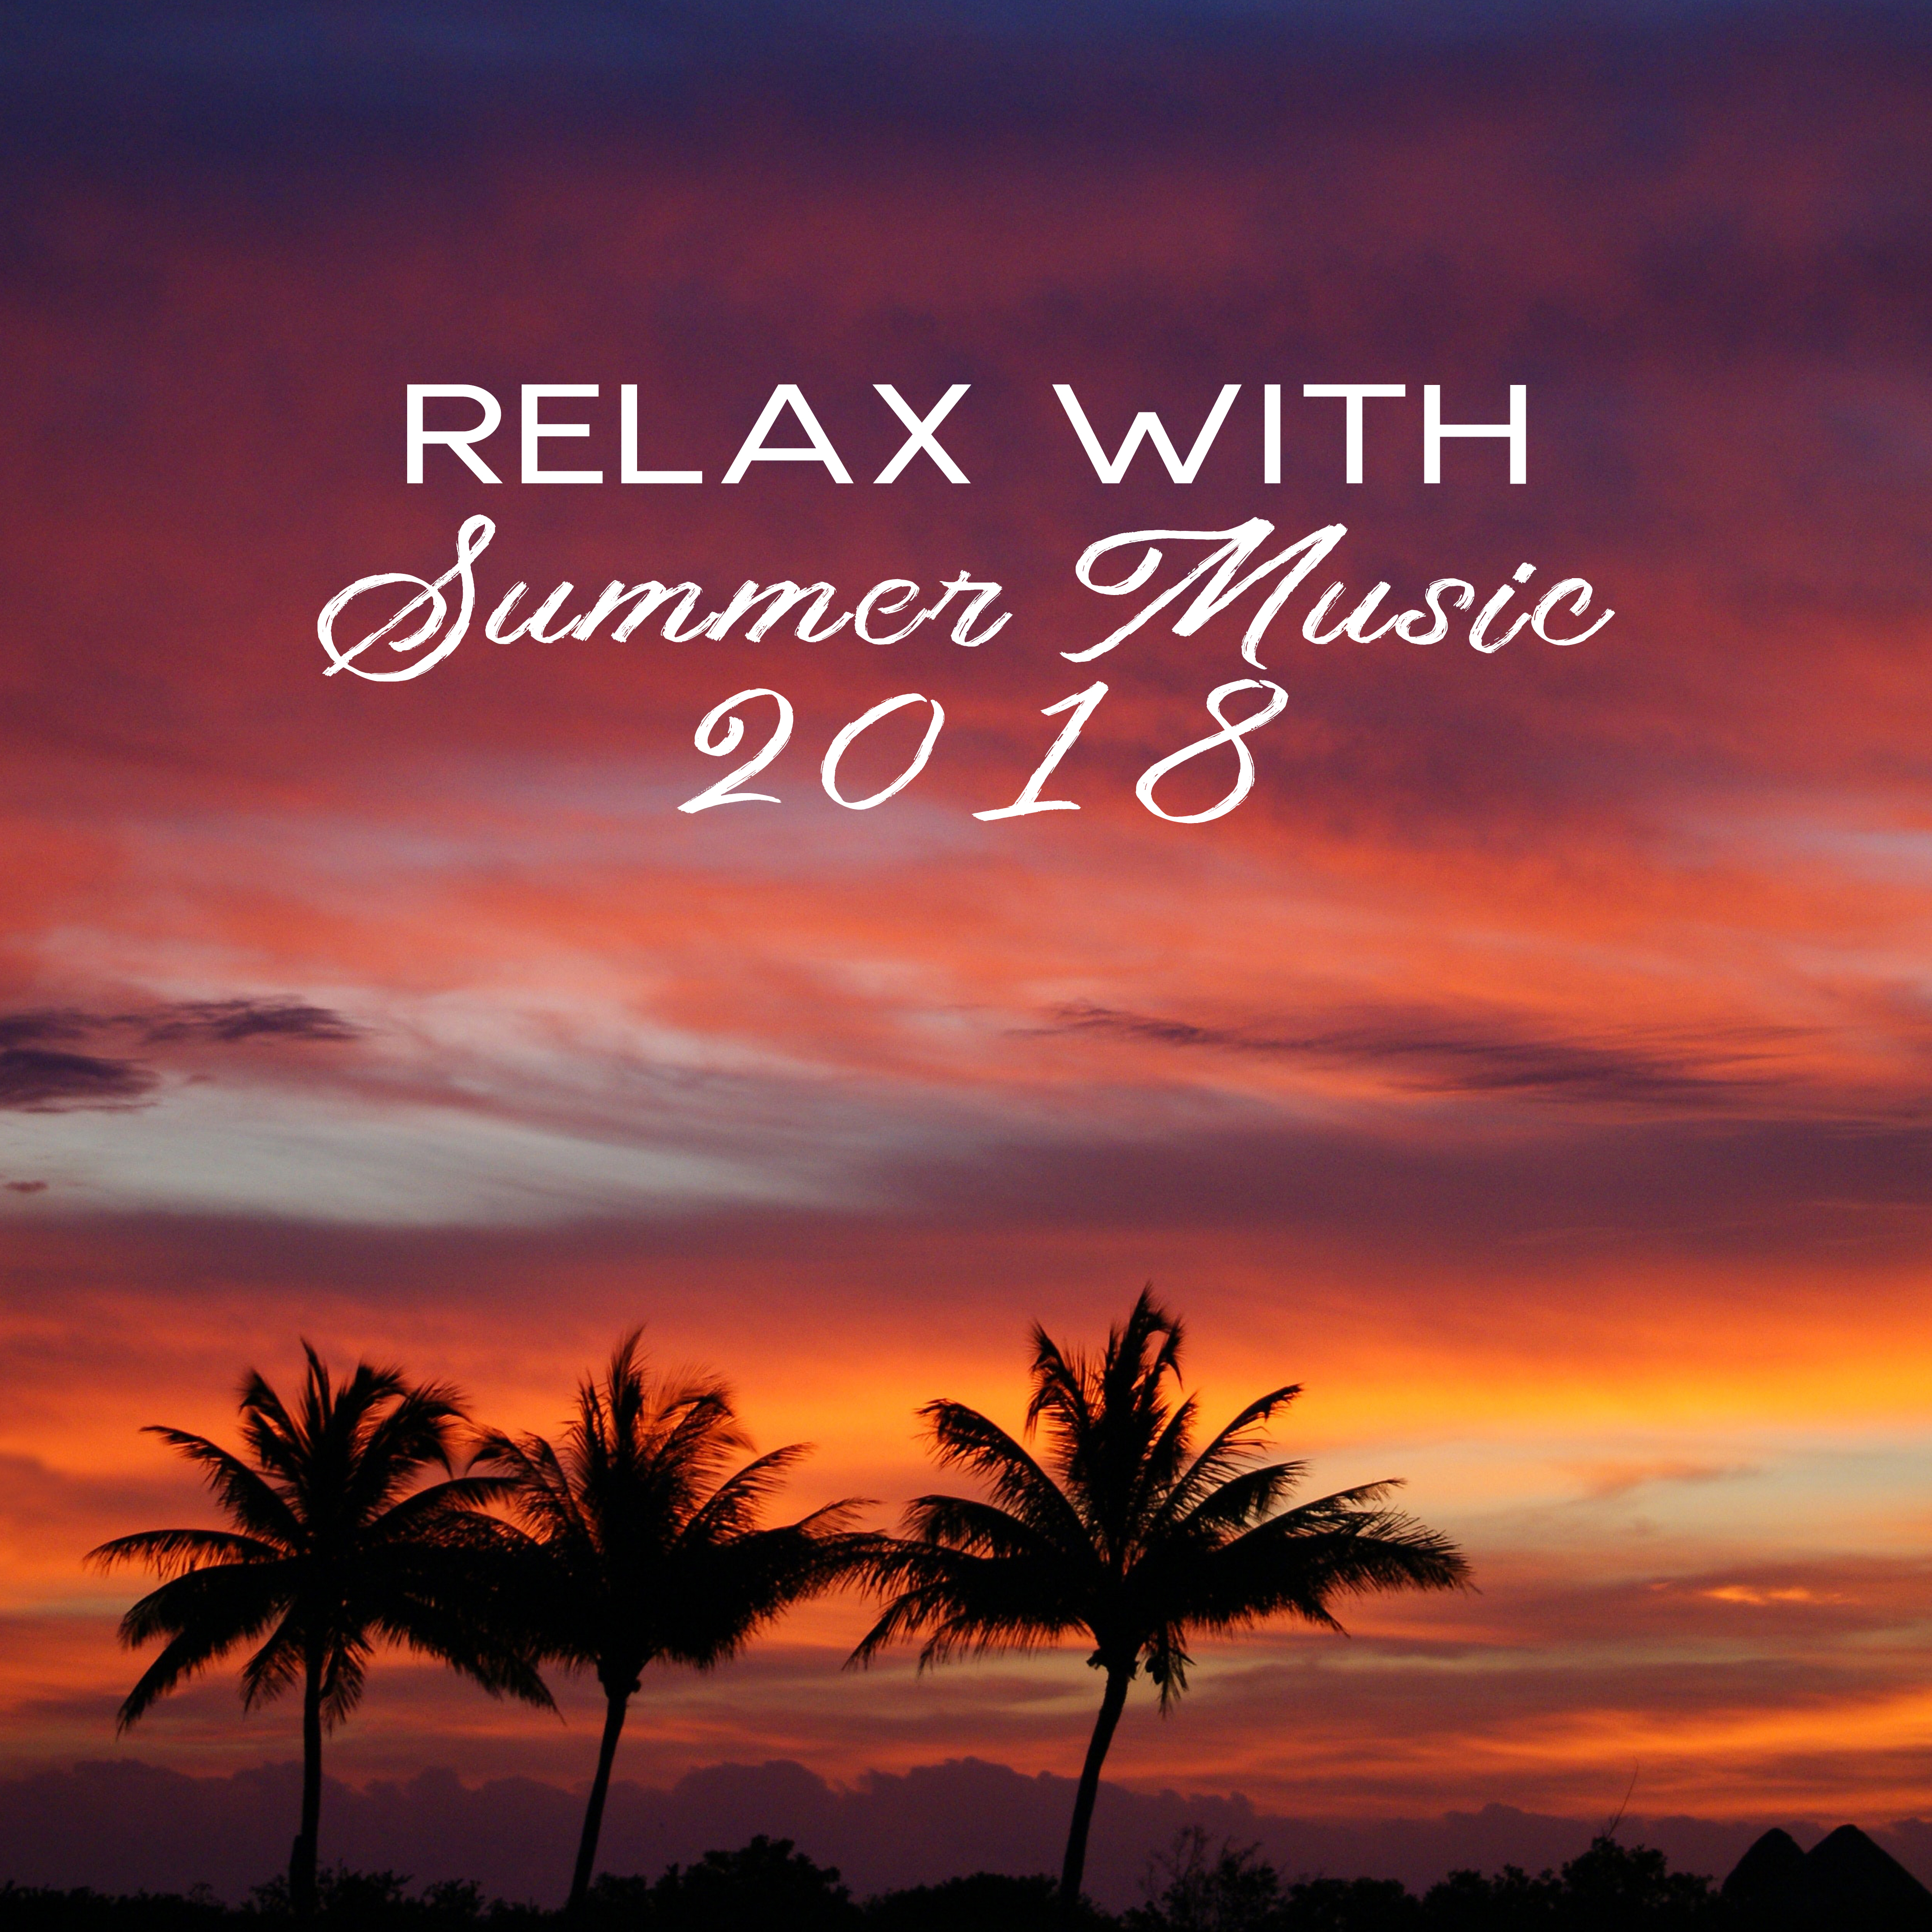 Relax with Summer Music 2018